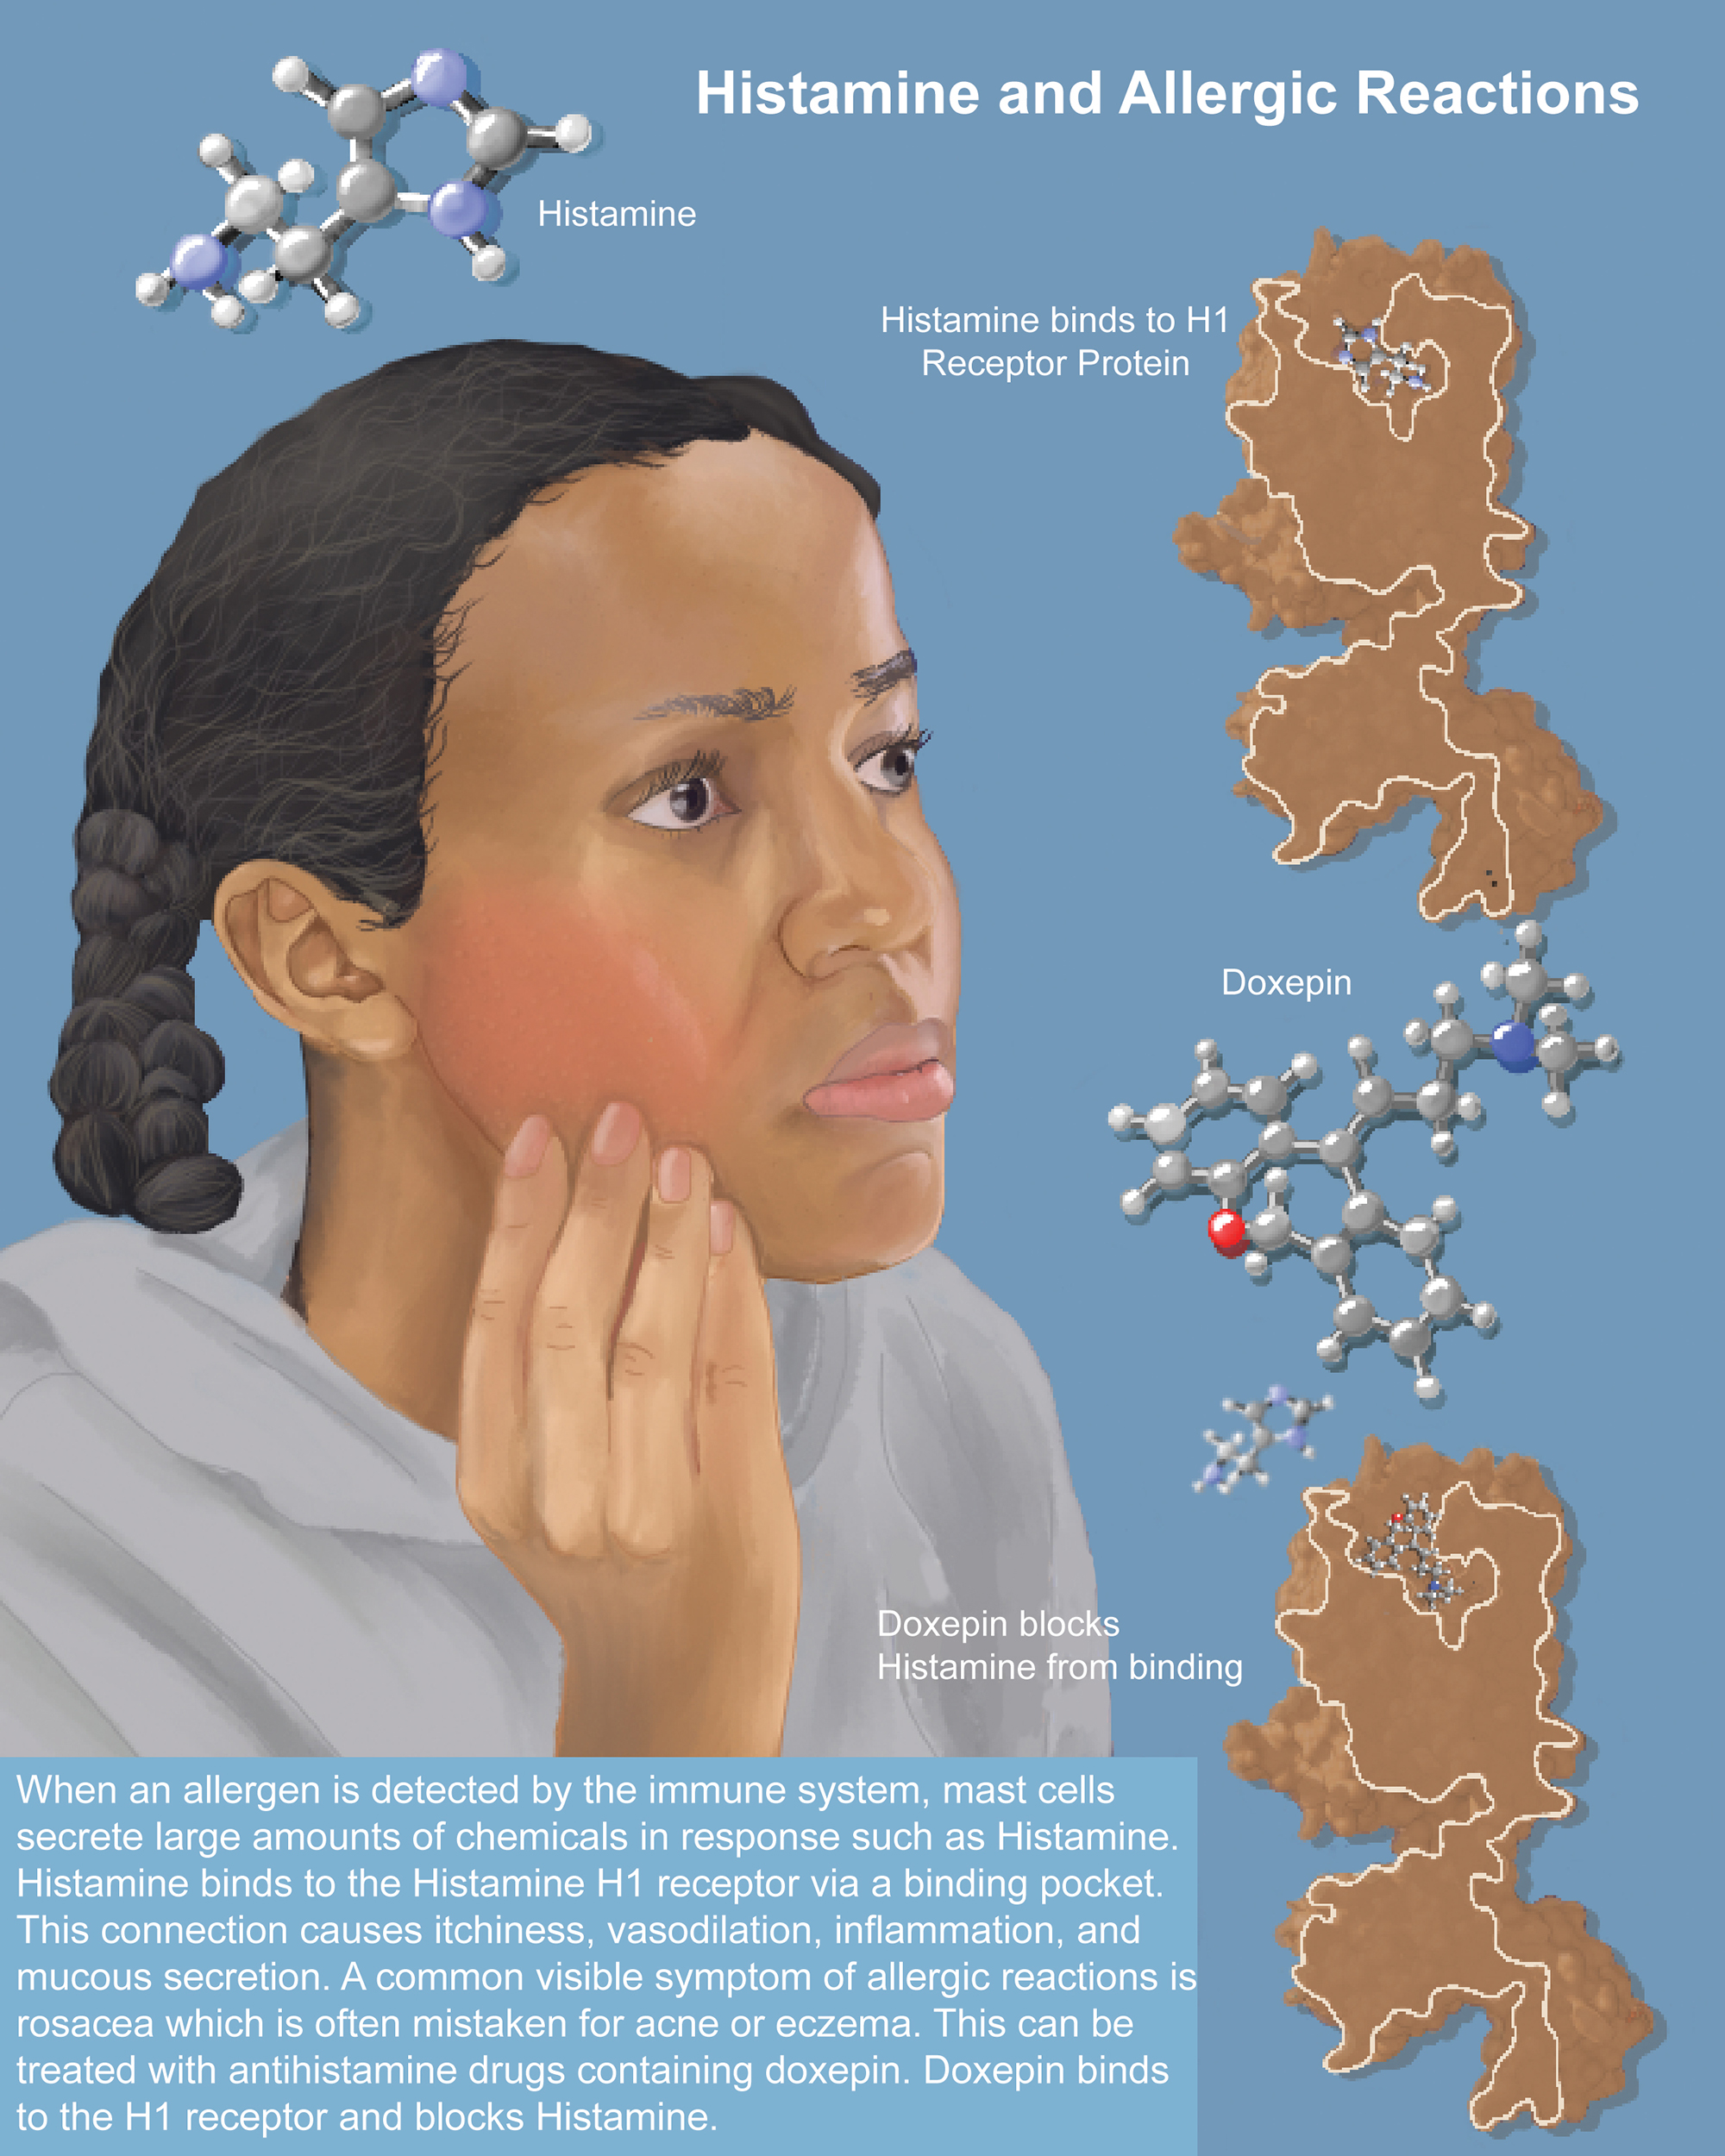 An illustration of an allergic reaction.